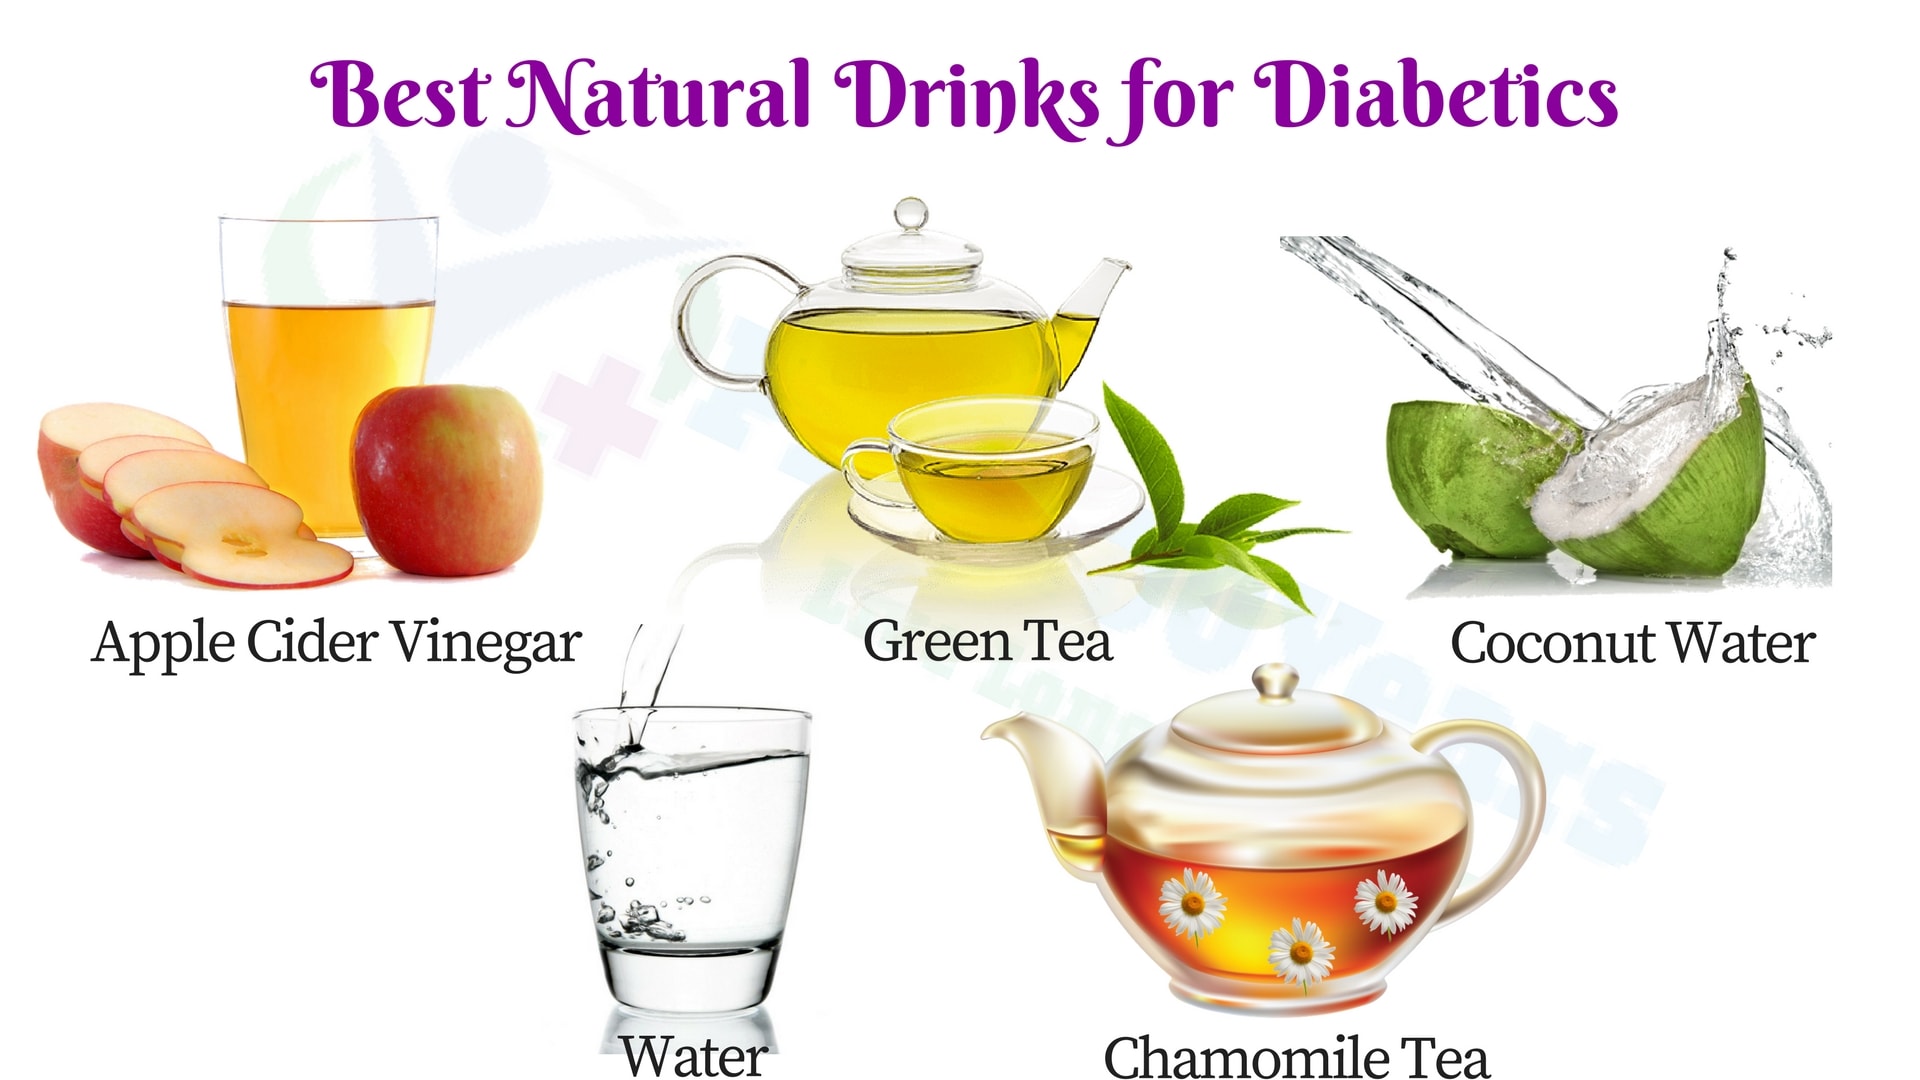 Top 5 Best Natural Drinks for Diabetics for the summer